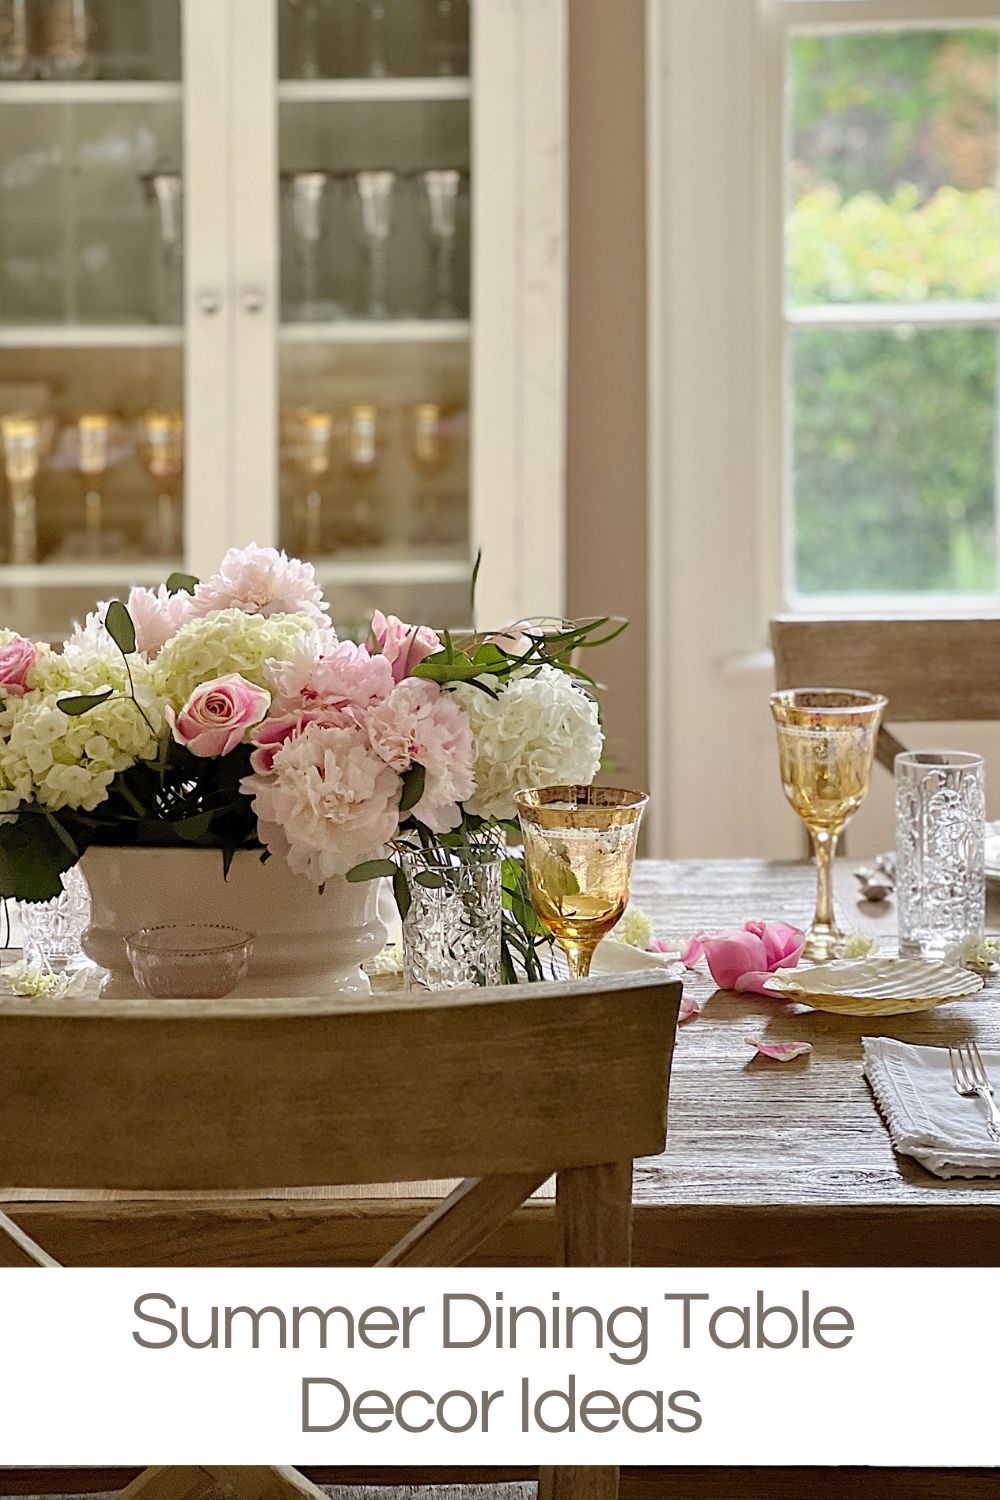 Summer has arrived and it's time to refresh our dining room. I am excited to share summer dining table decor ideas that I think you will love!